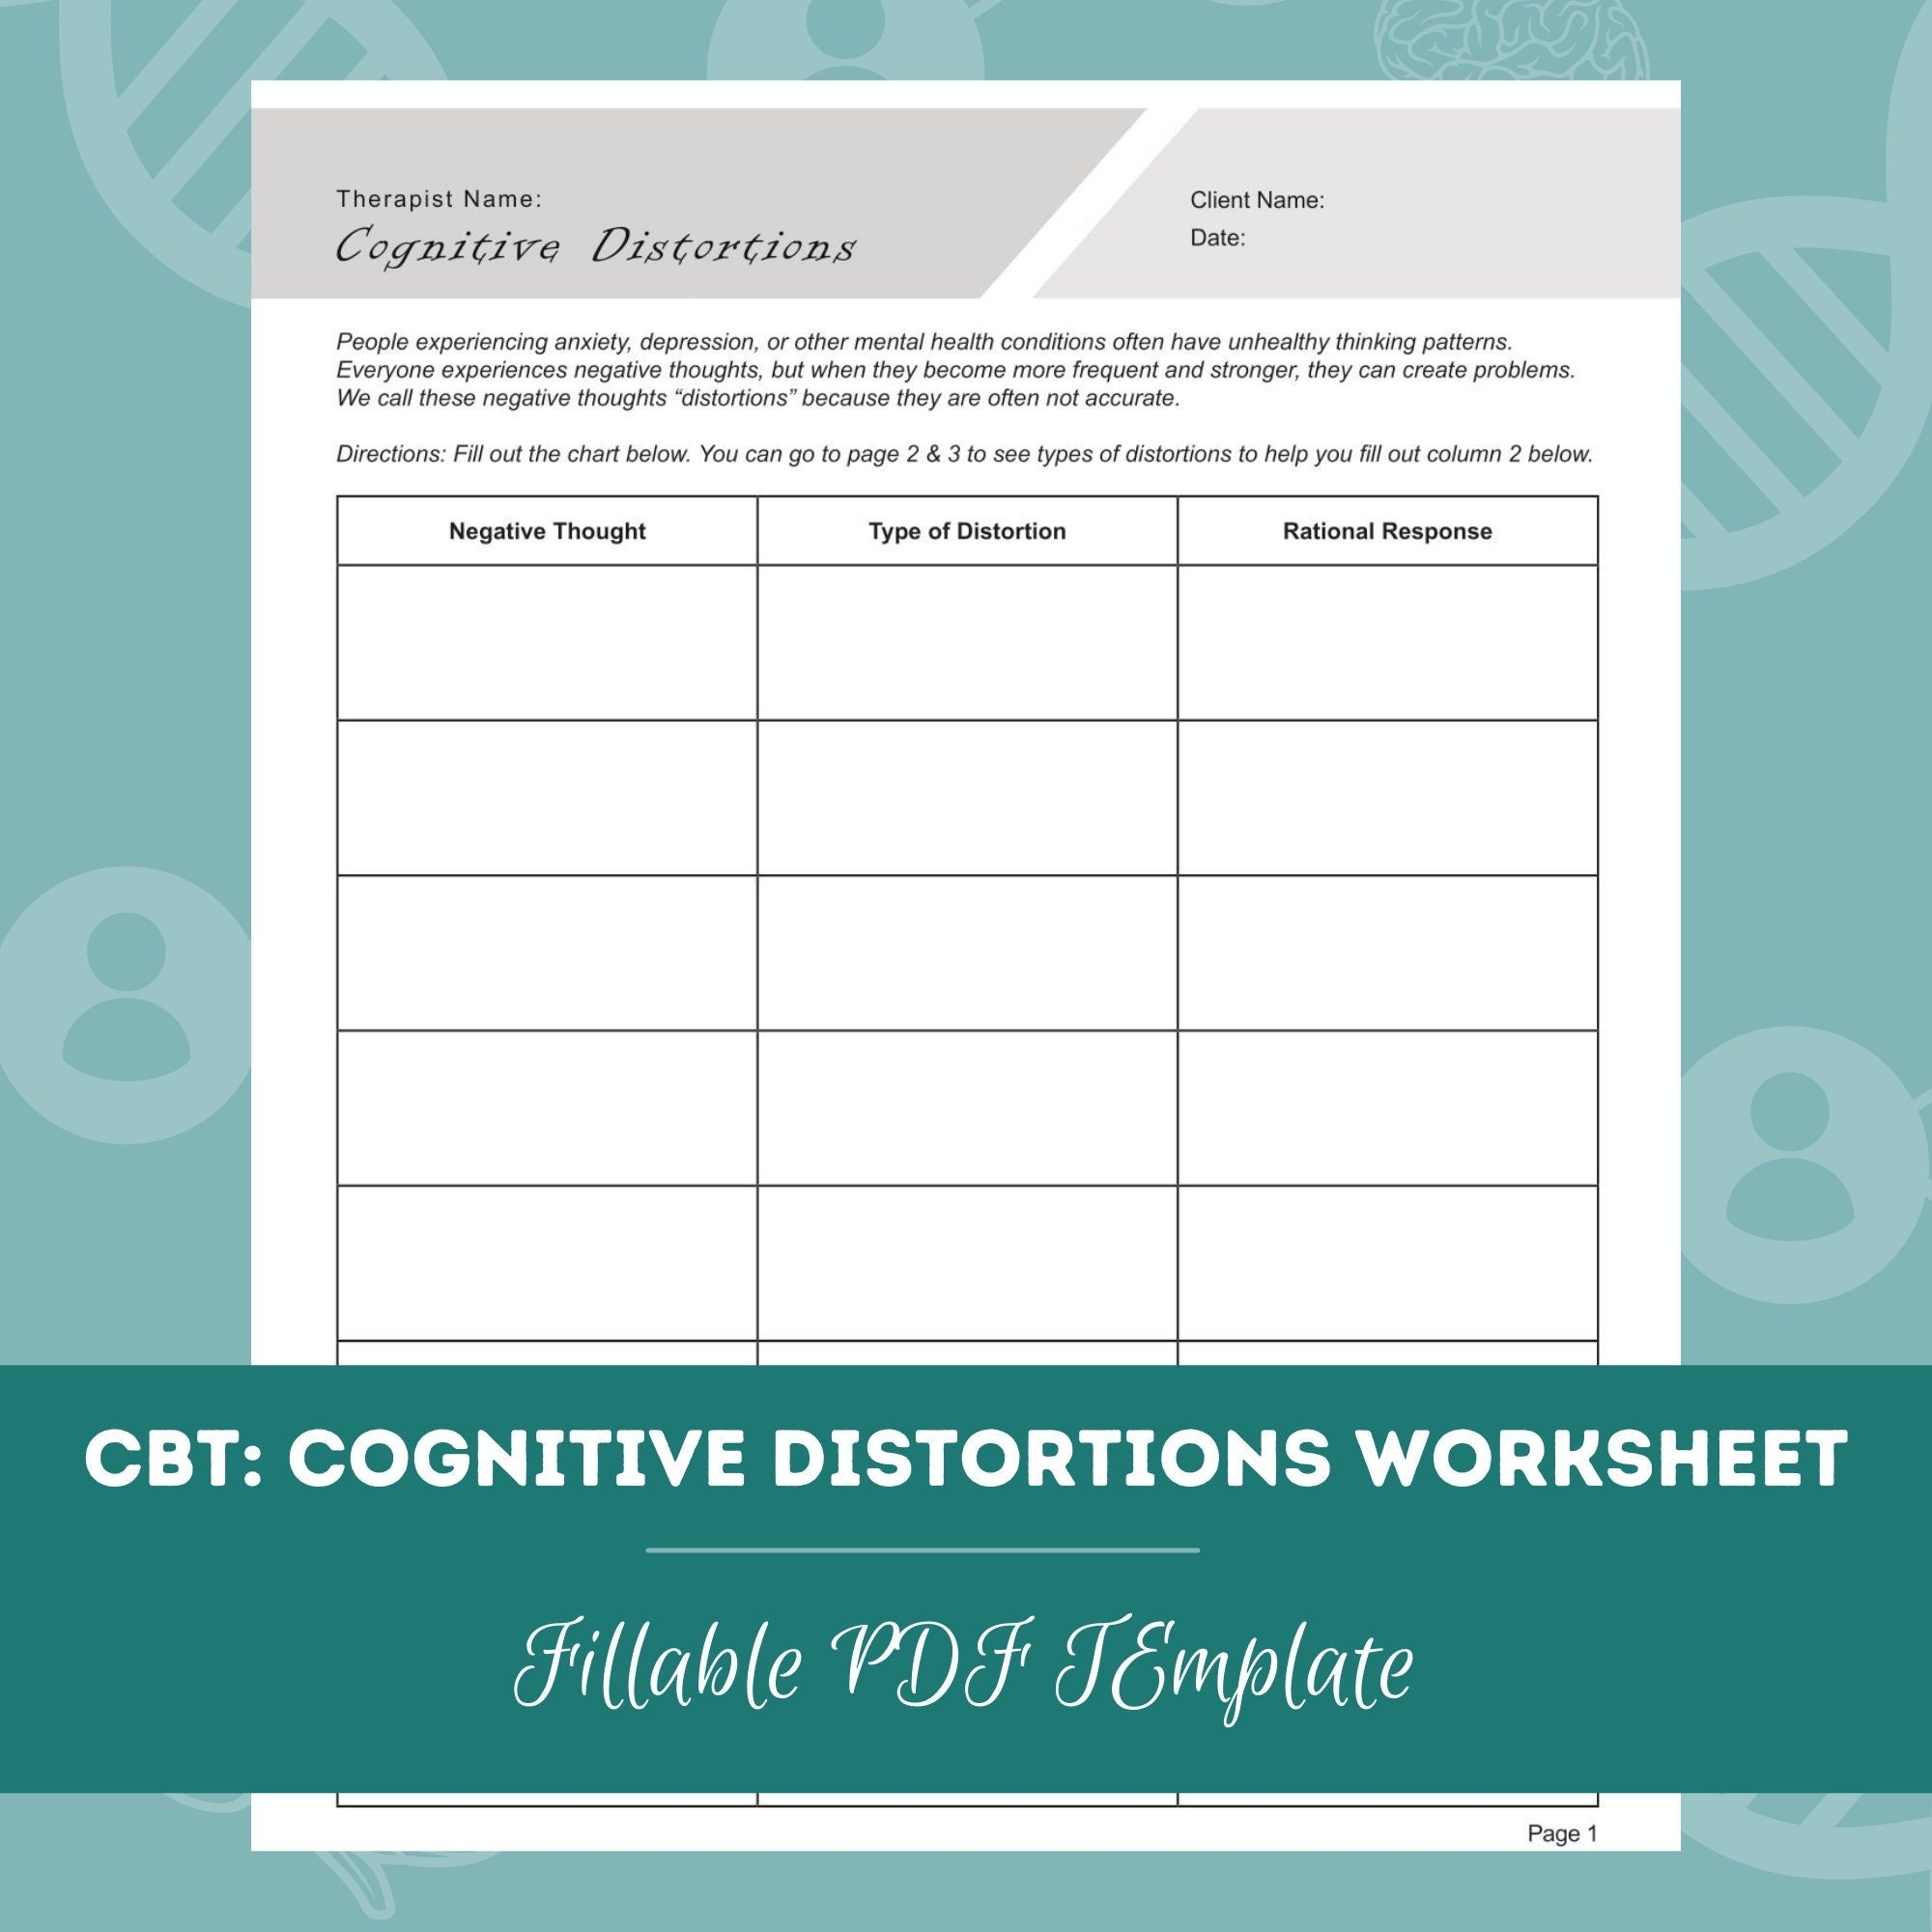 CBT Cognitive Distortions Worksheet Editable Fillable PDF For Counselors Psychologists Psychiatrists Therapists Etsy